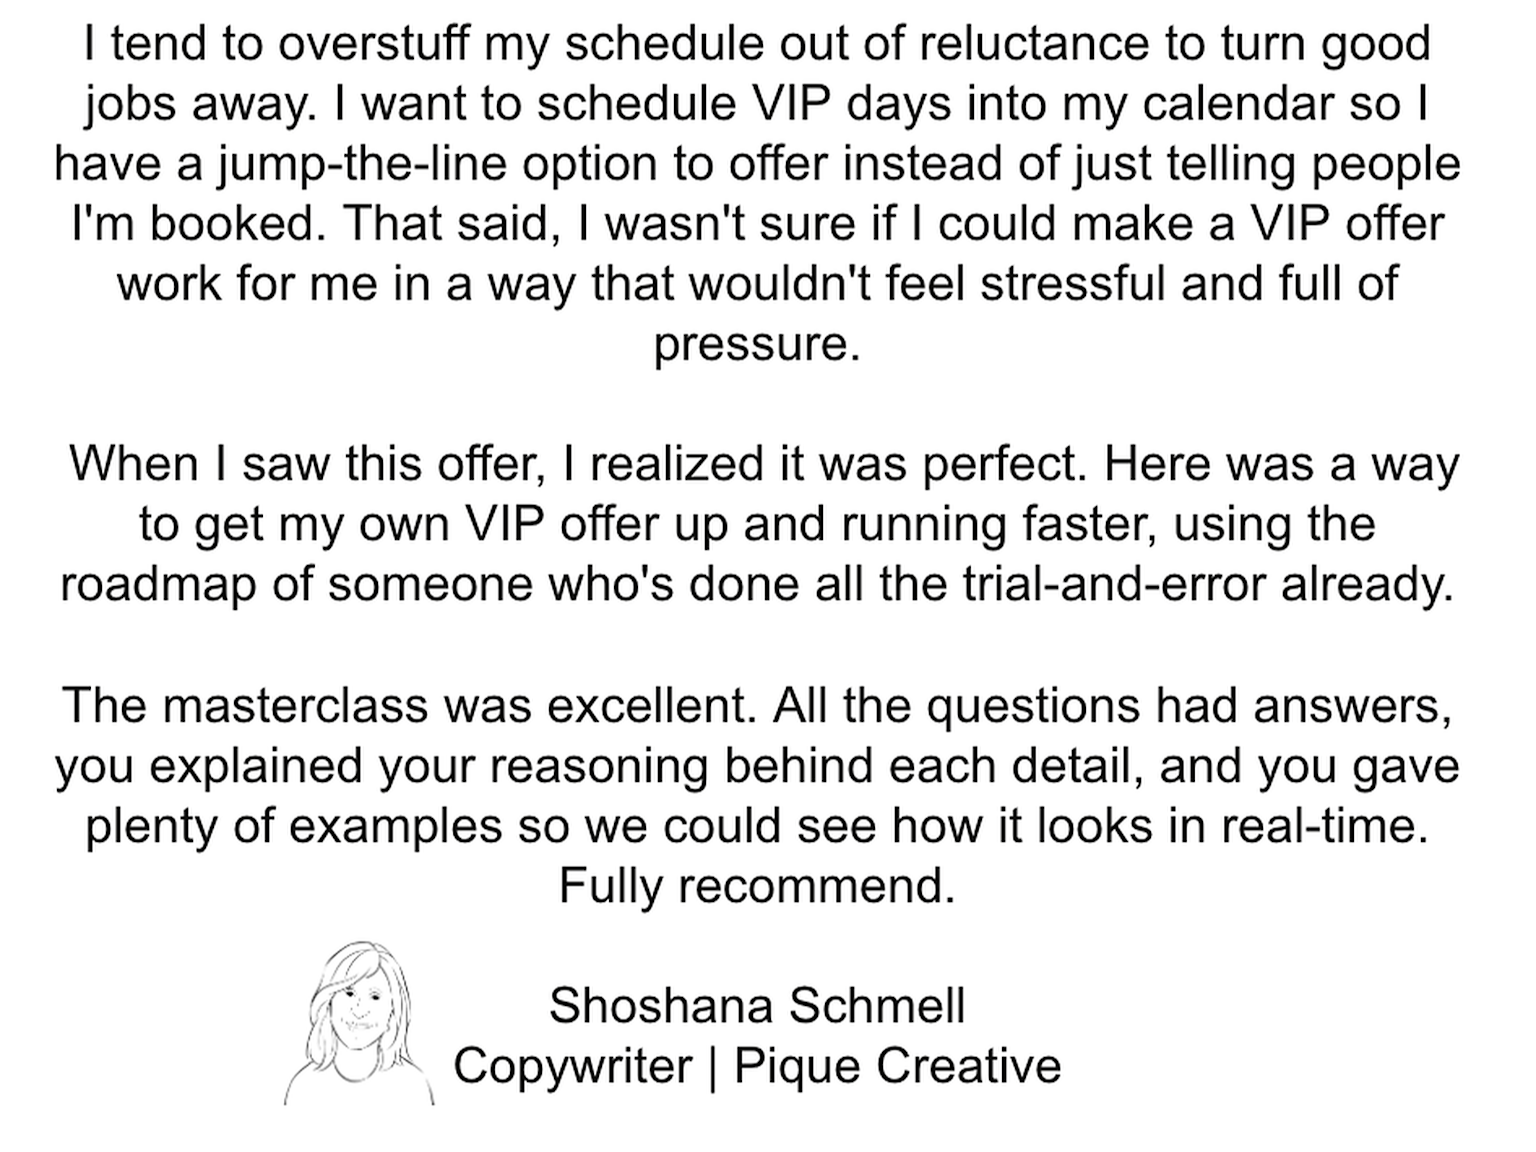 “Here was a way to get my own VIP offer up and running faster, using the roadmap of someone who's done all the trial-and-error already."